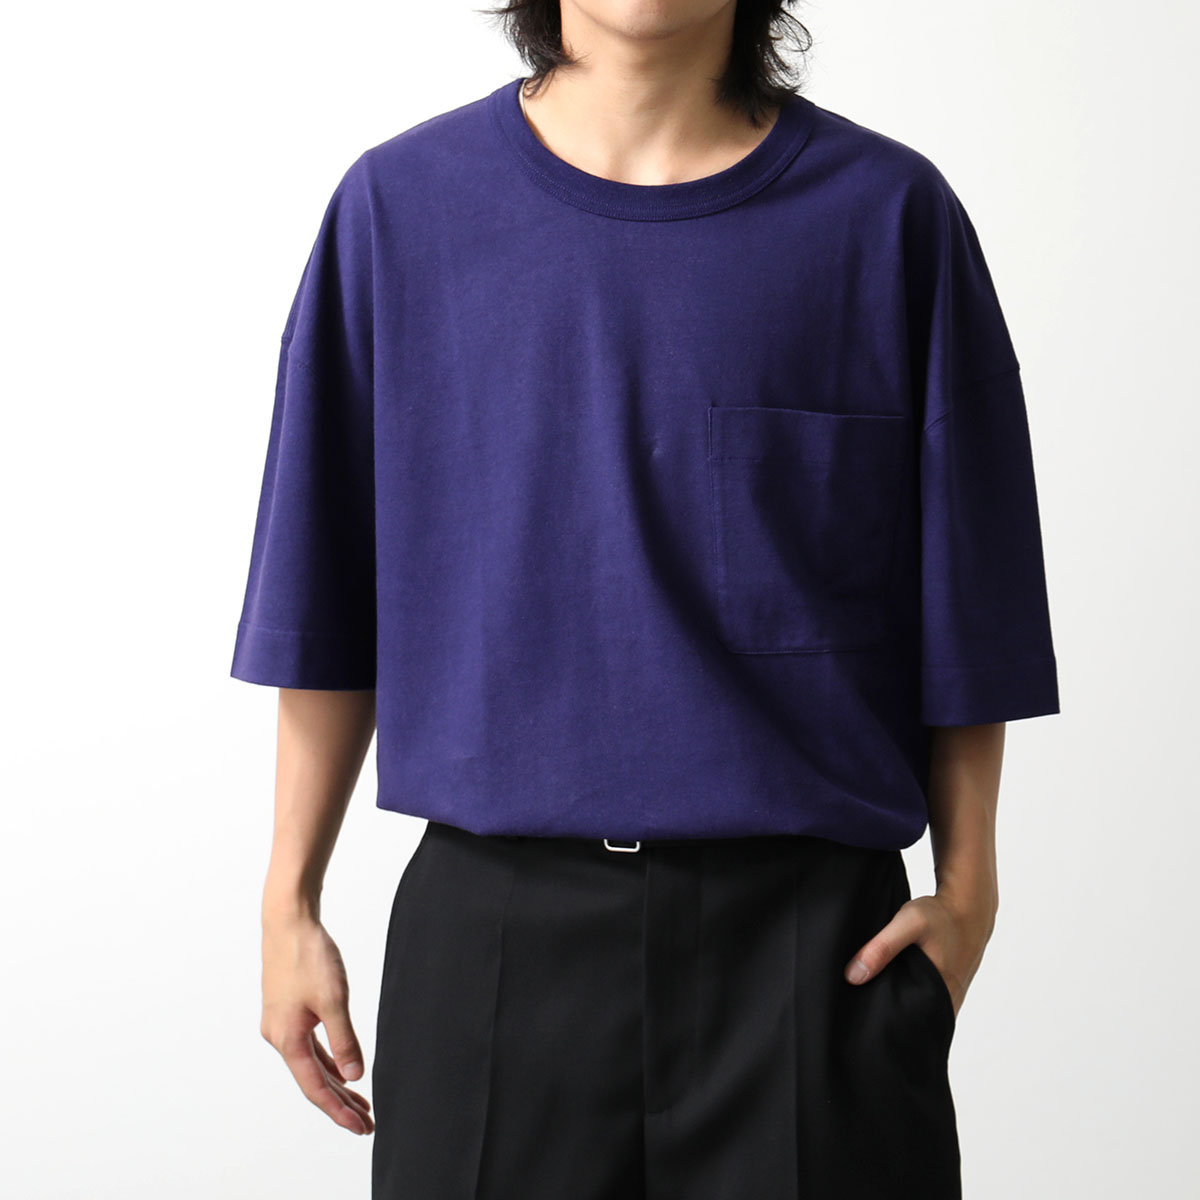 Lemaire ルメール Tシャツ TO1165 LJ1010 メンズ 半袖 クルーネック カットソ...